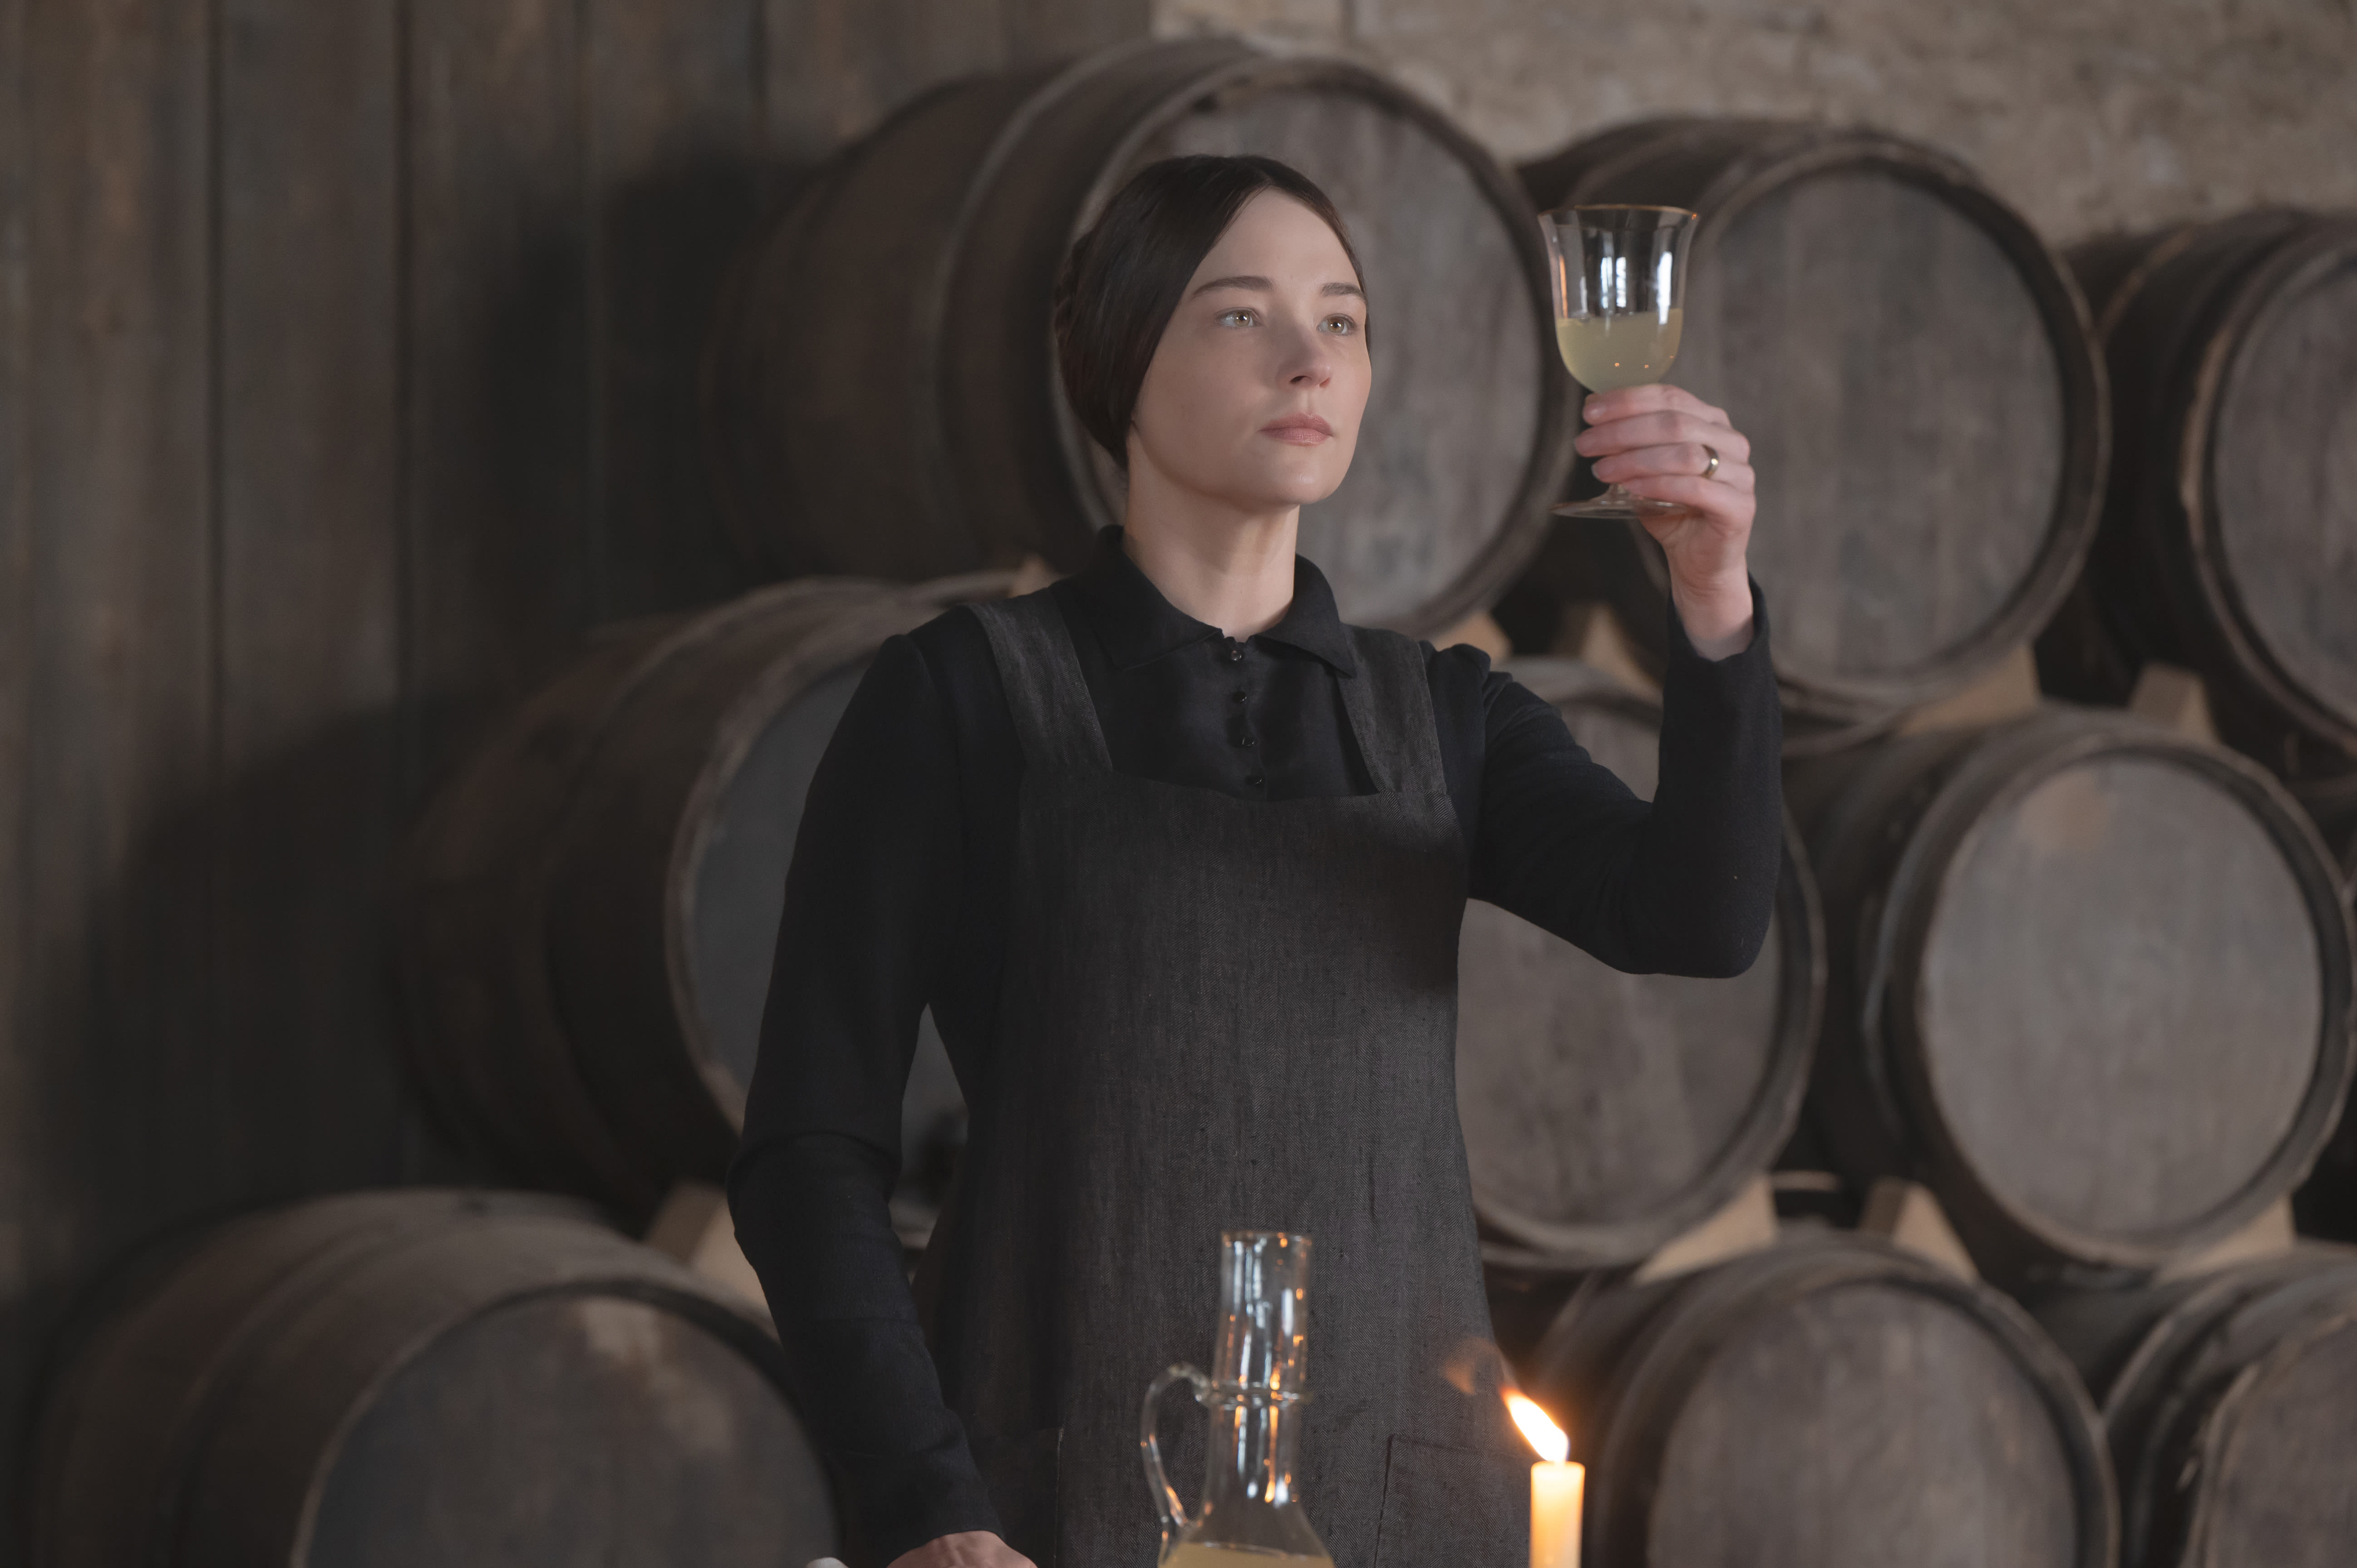 Review: A bit fizzy with romantic intrigue, 'Widow Clicquot' raises a glass to a woman innovator